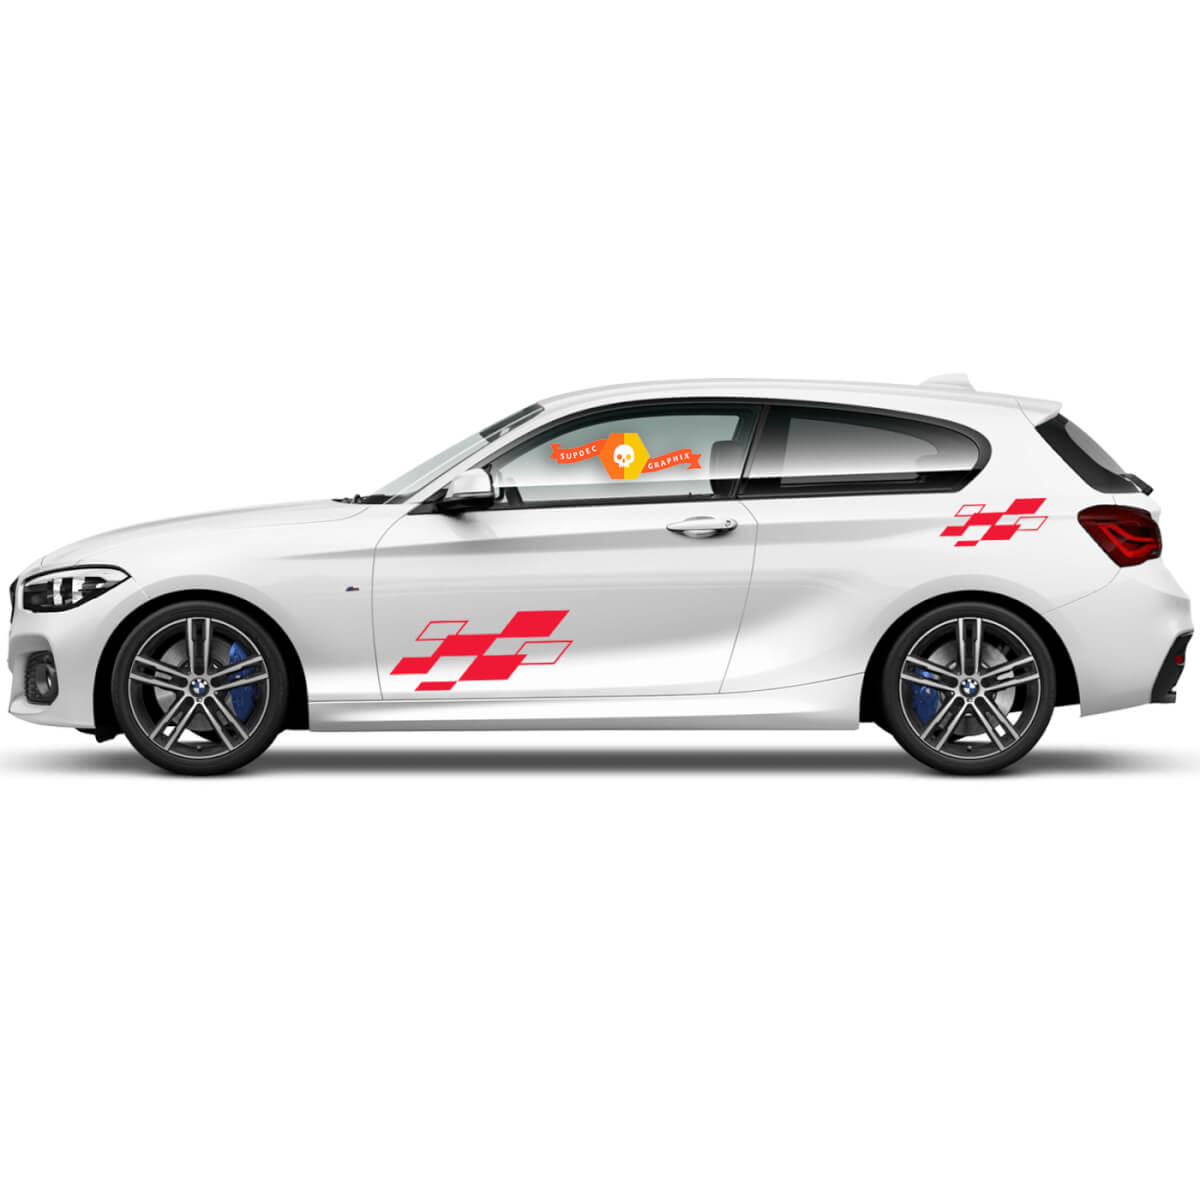 Pair Vinyl Decals Graphic Stickers side bmw 1 series 2015 Red diamonds bottom and top
